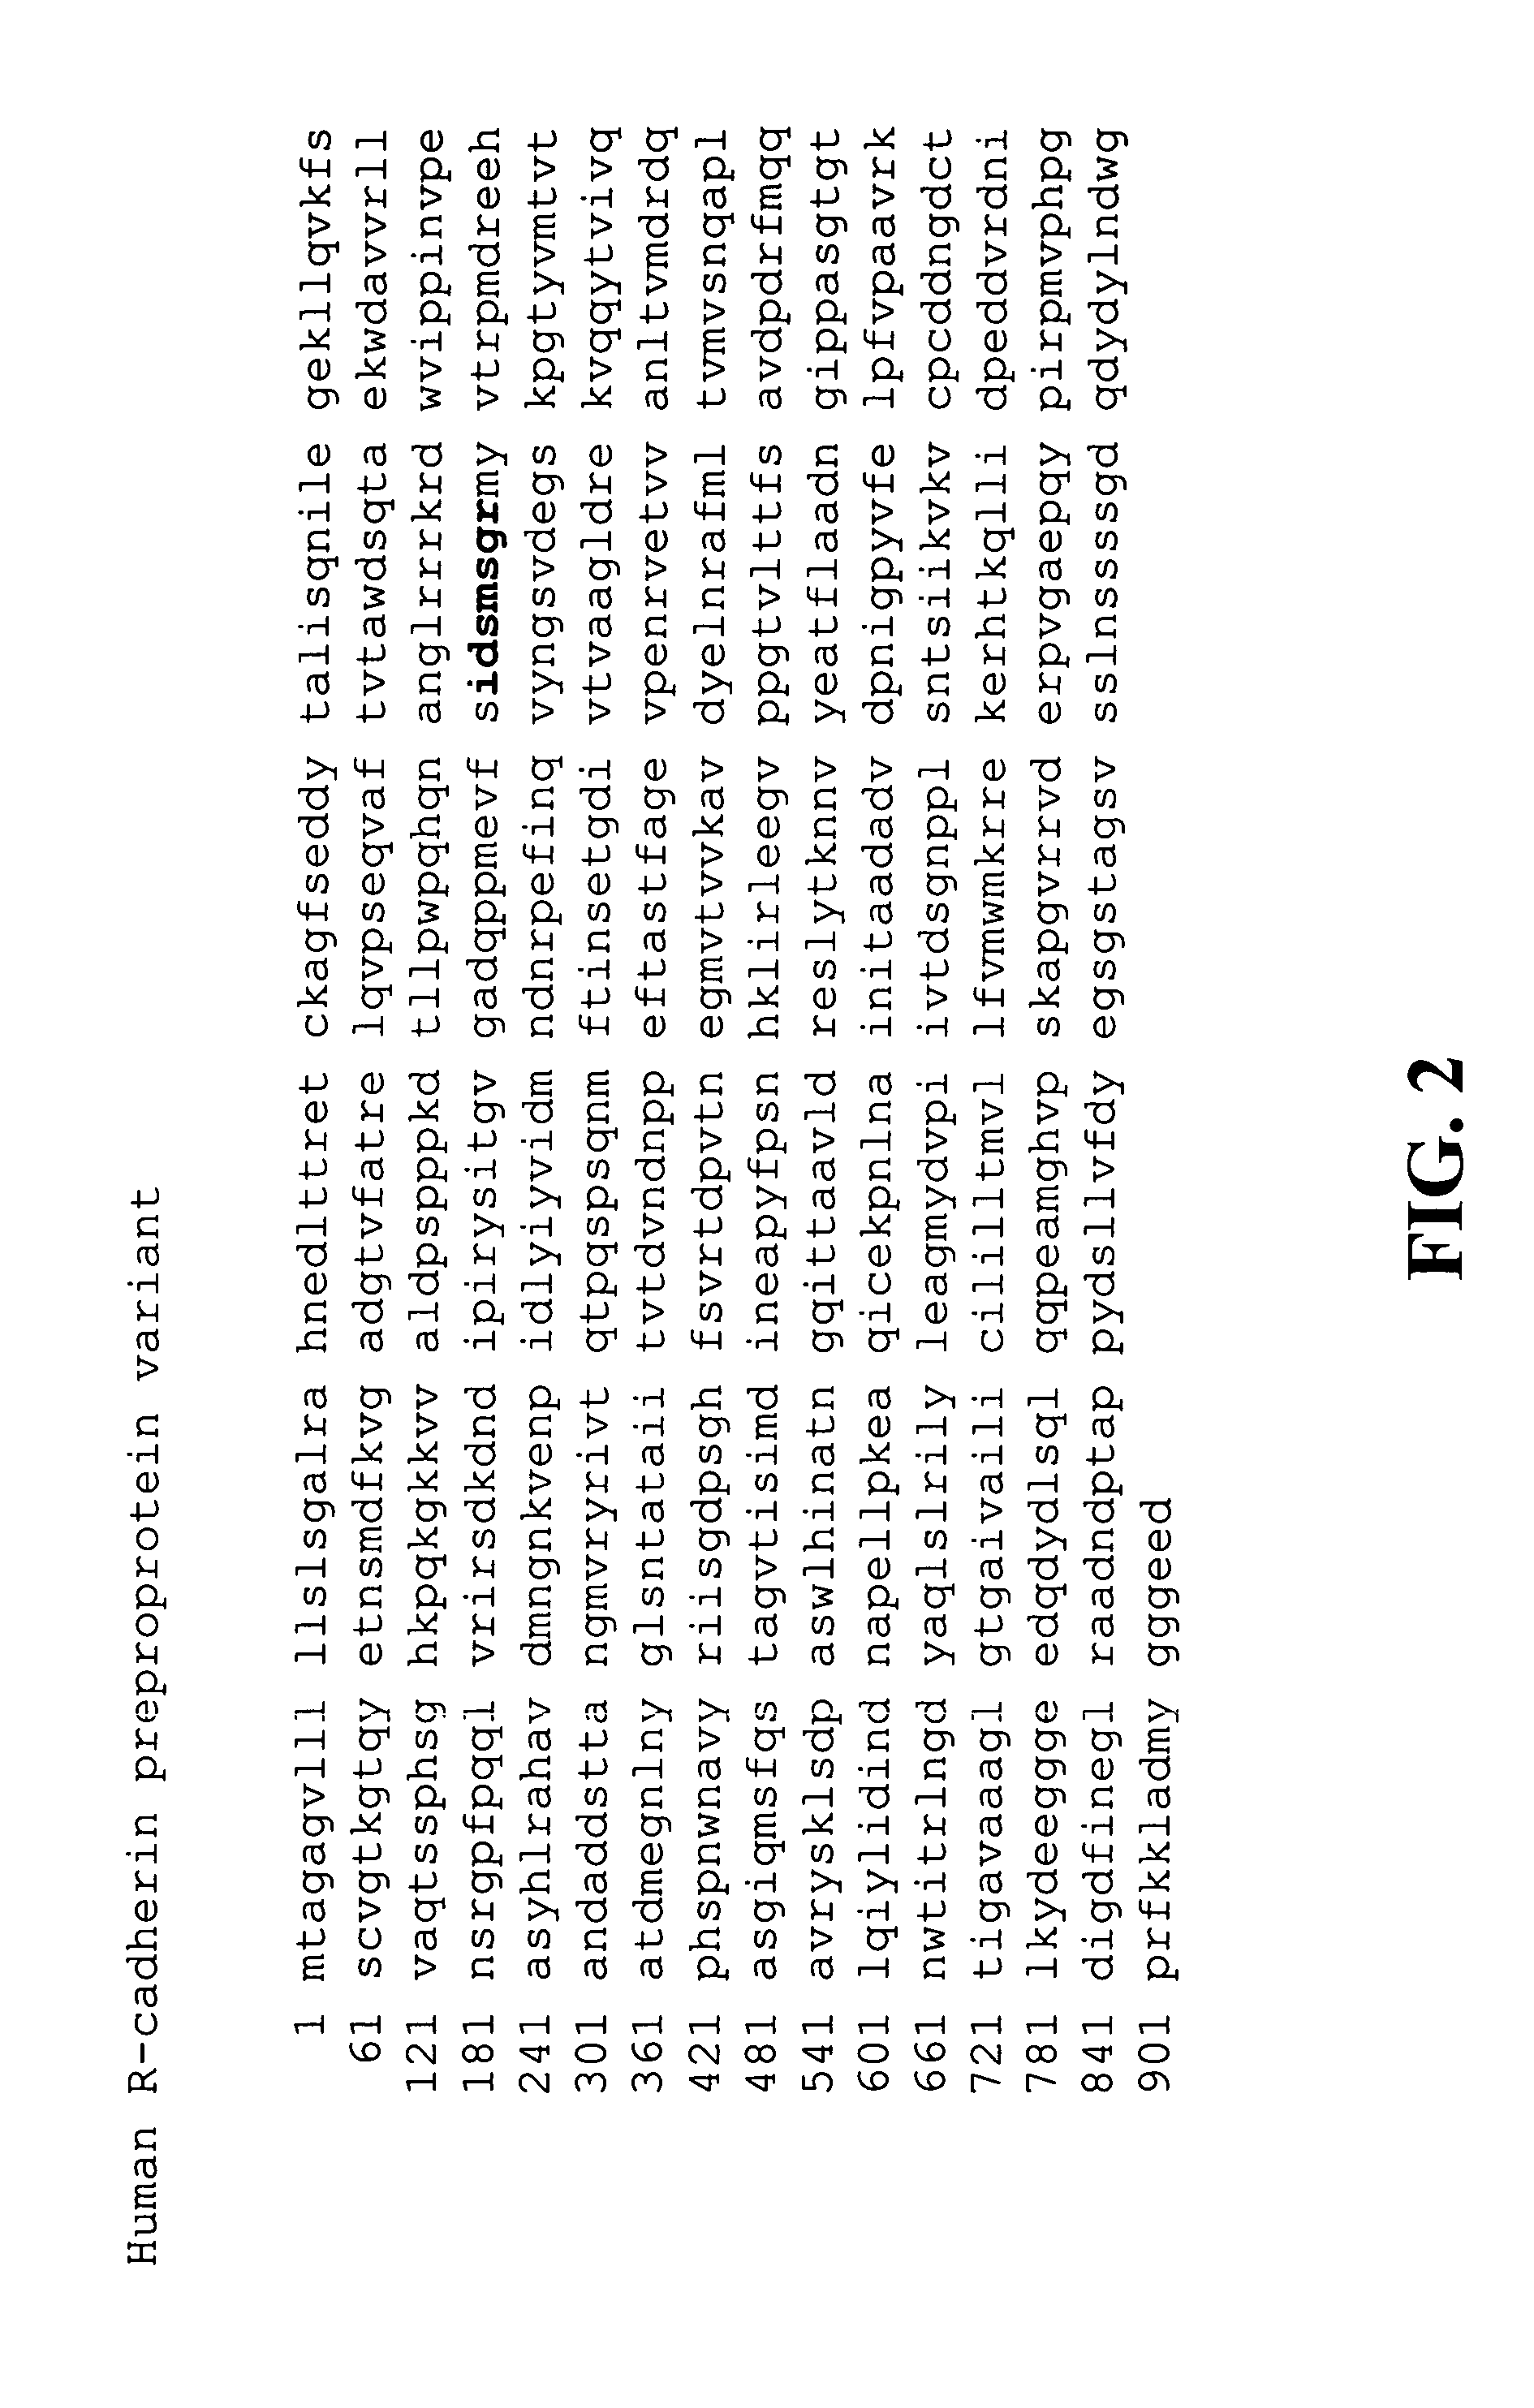 Selective R-cadherin antagonist and methods